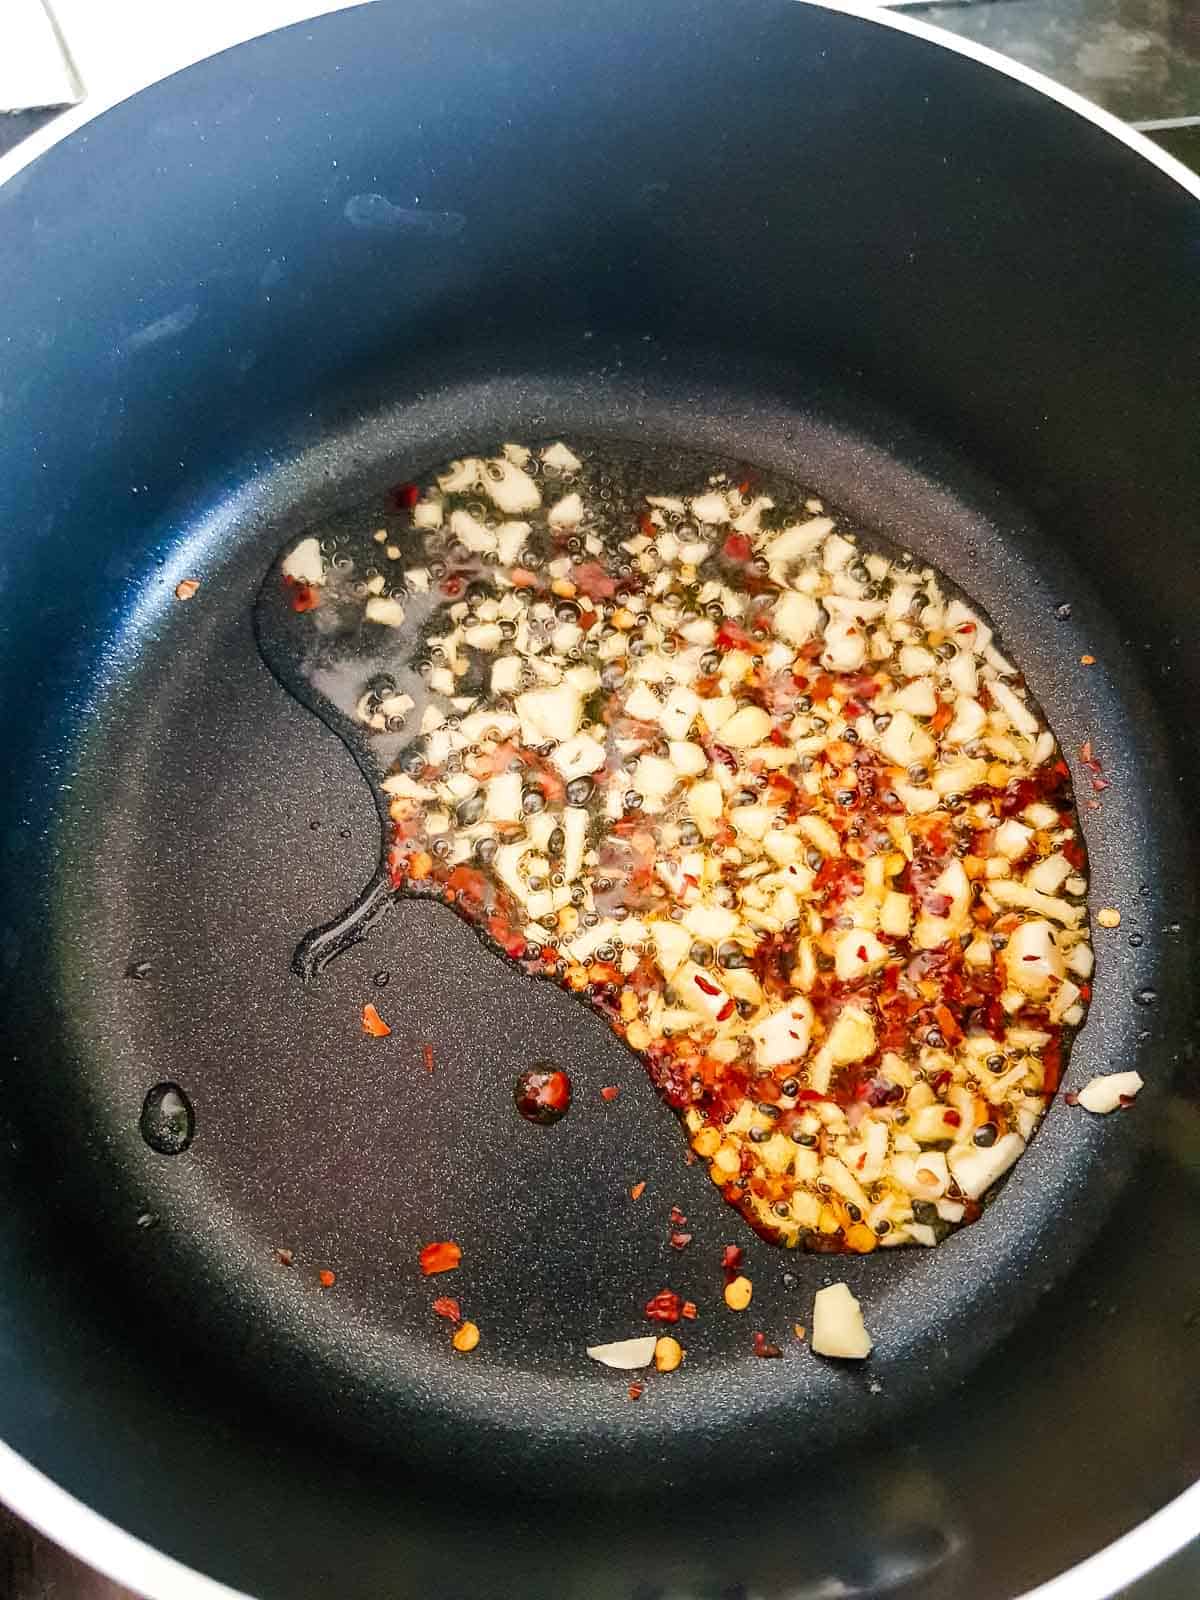 Chopped garlic and red pepper flakes sautéing in a pot.